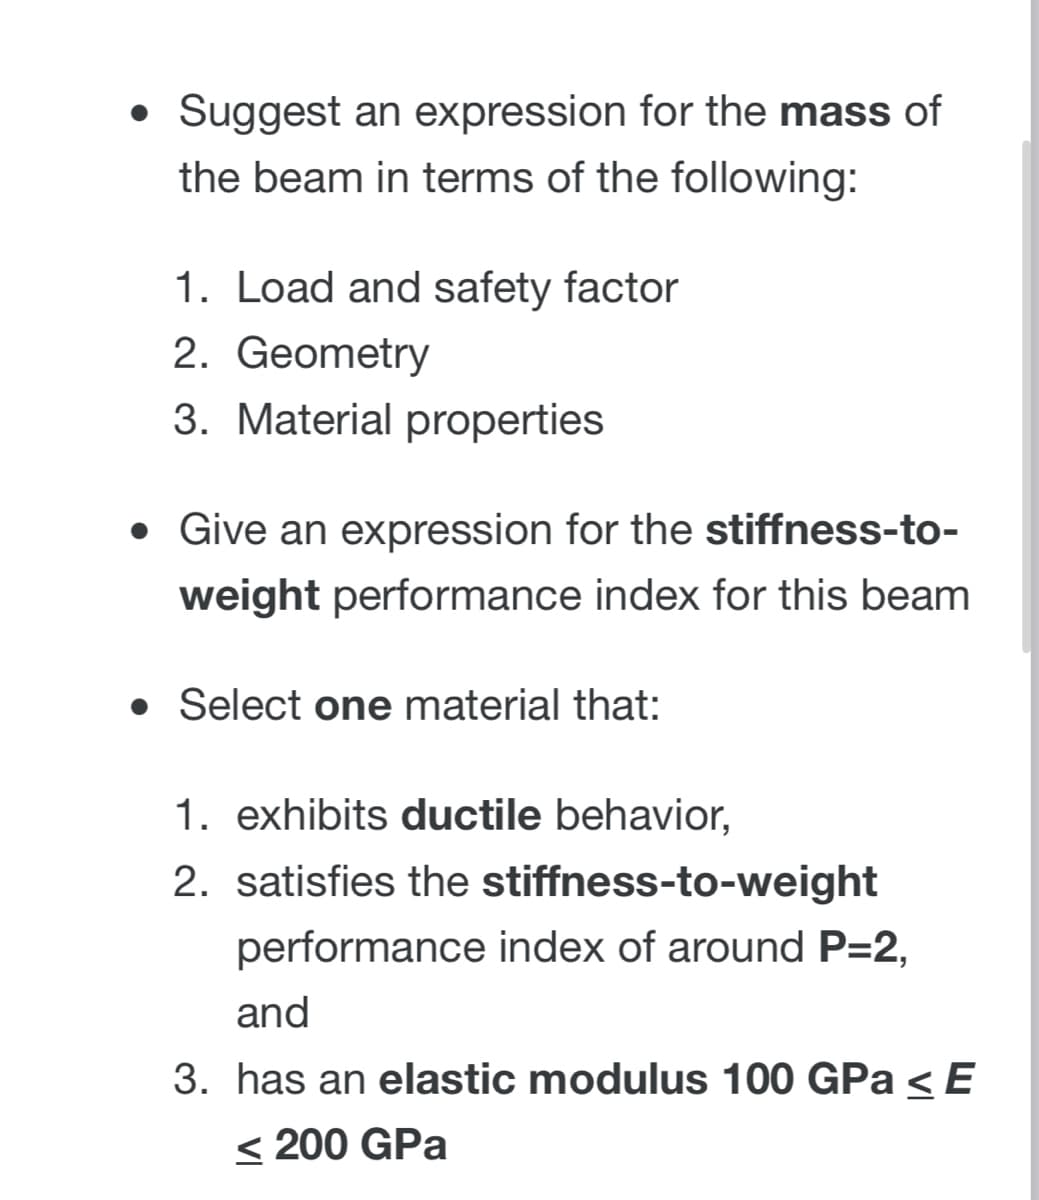 • Suggest an expression for the mass of
the beam in terms of the following:
1. Load and safety factor
2. Geometry
3. Material properties
• Give an expression for the stiffness-to-
weight performance index for this beam
• Select one material that:
1. exhibits ductile behavior,
2. satisfies the stiffness-to-weight
performance index of around P=2,
and
3. has an elastic modulus 100 GPa < E
< 200 GPa